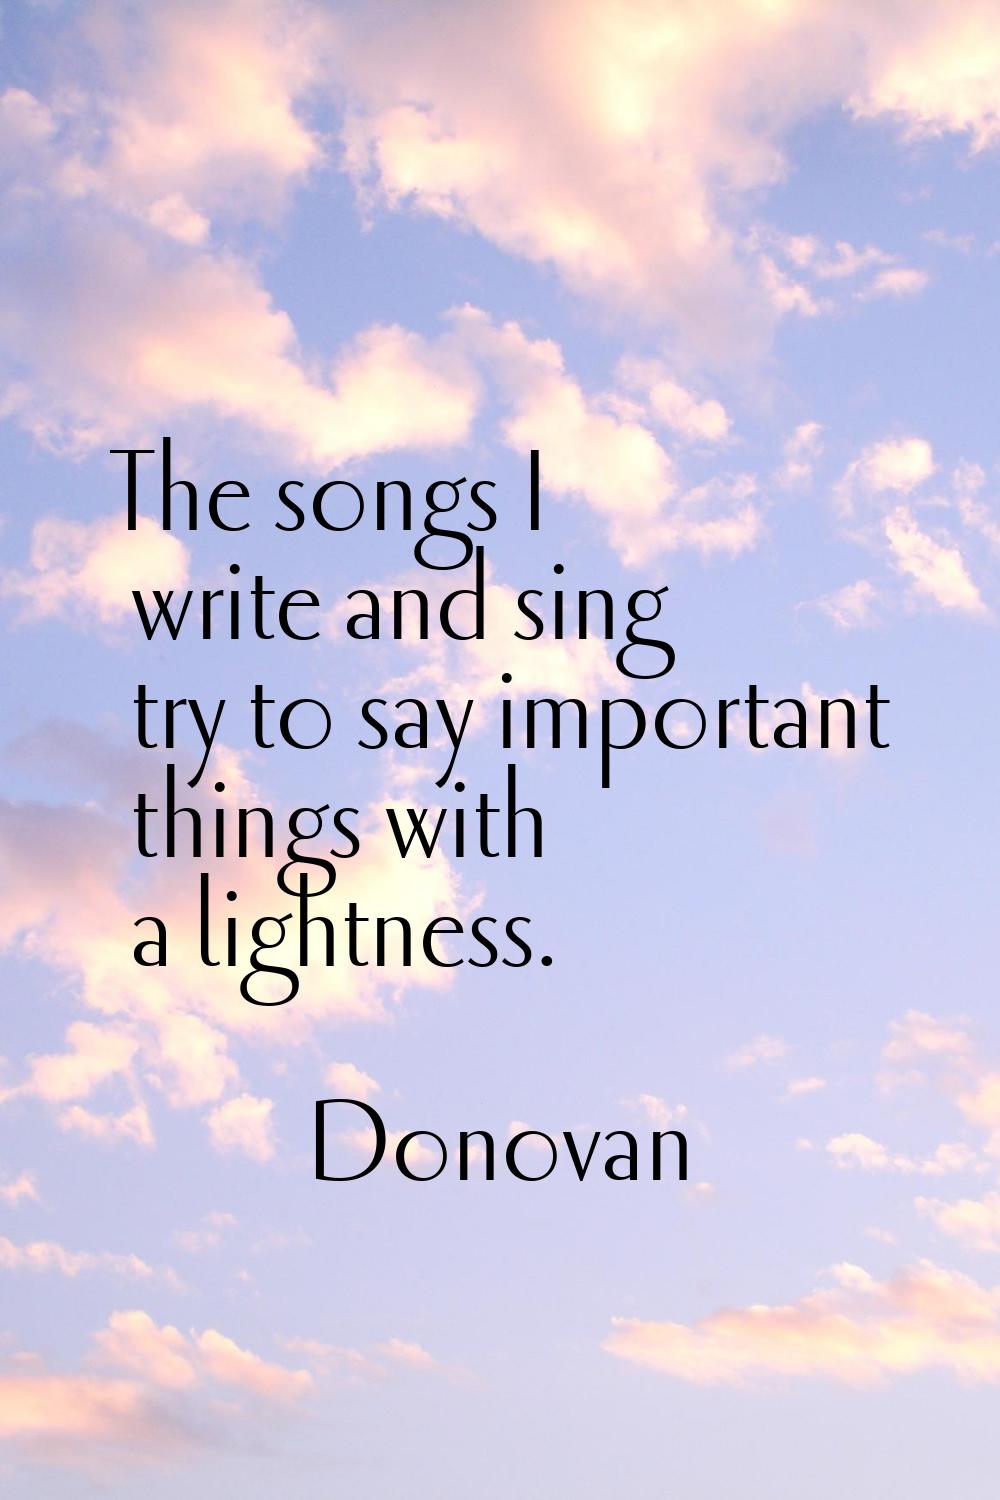 The songs I write and sing try to say important things with a lightness.